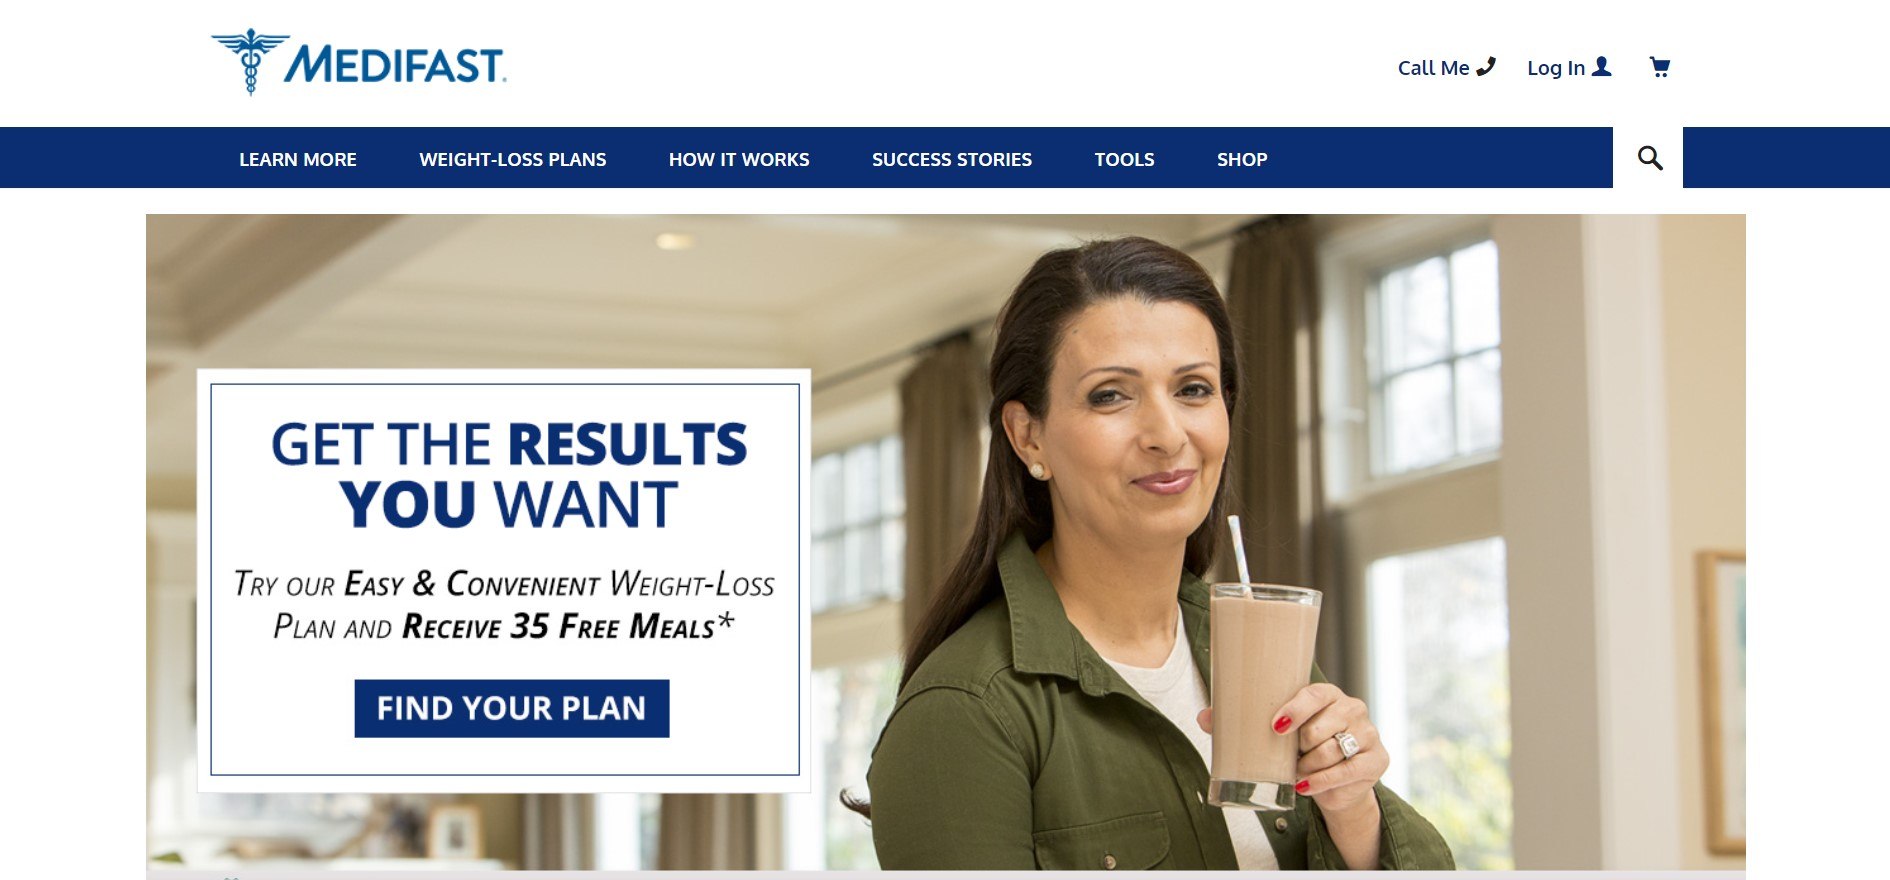 This screenshot includes a photo of a woman in a green jacket holding a Medifast meal replacement shake.